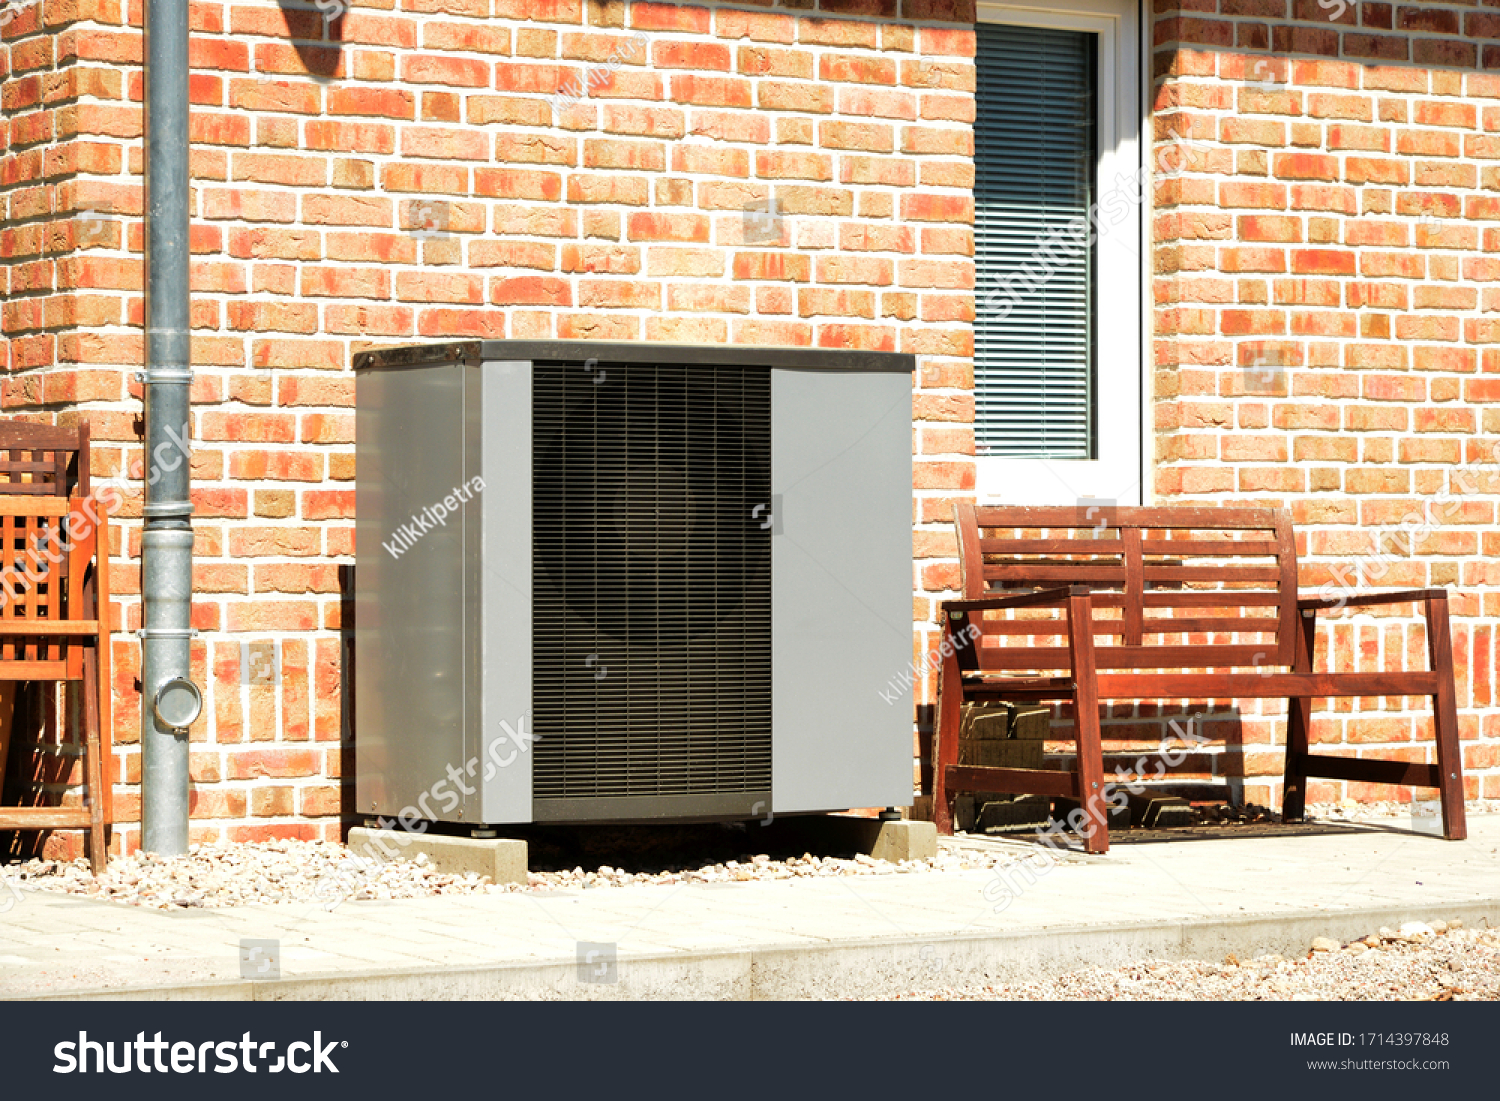 Air-Air Heat Pump for Heating and hot Water in Front of an Apartment Building #1714397848